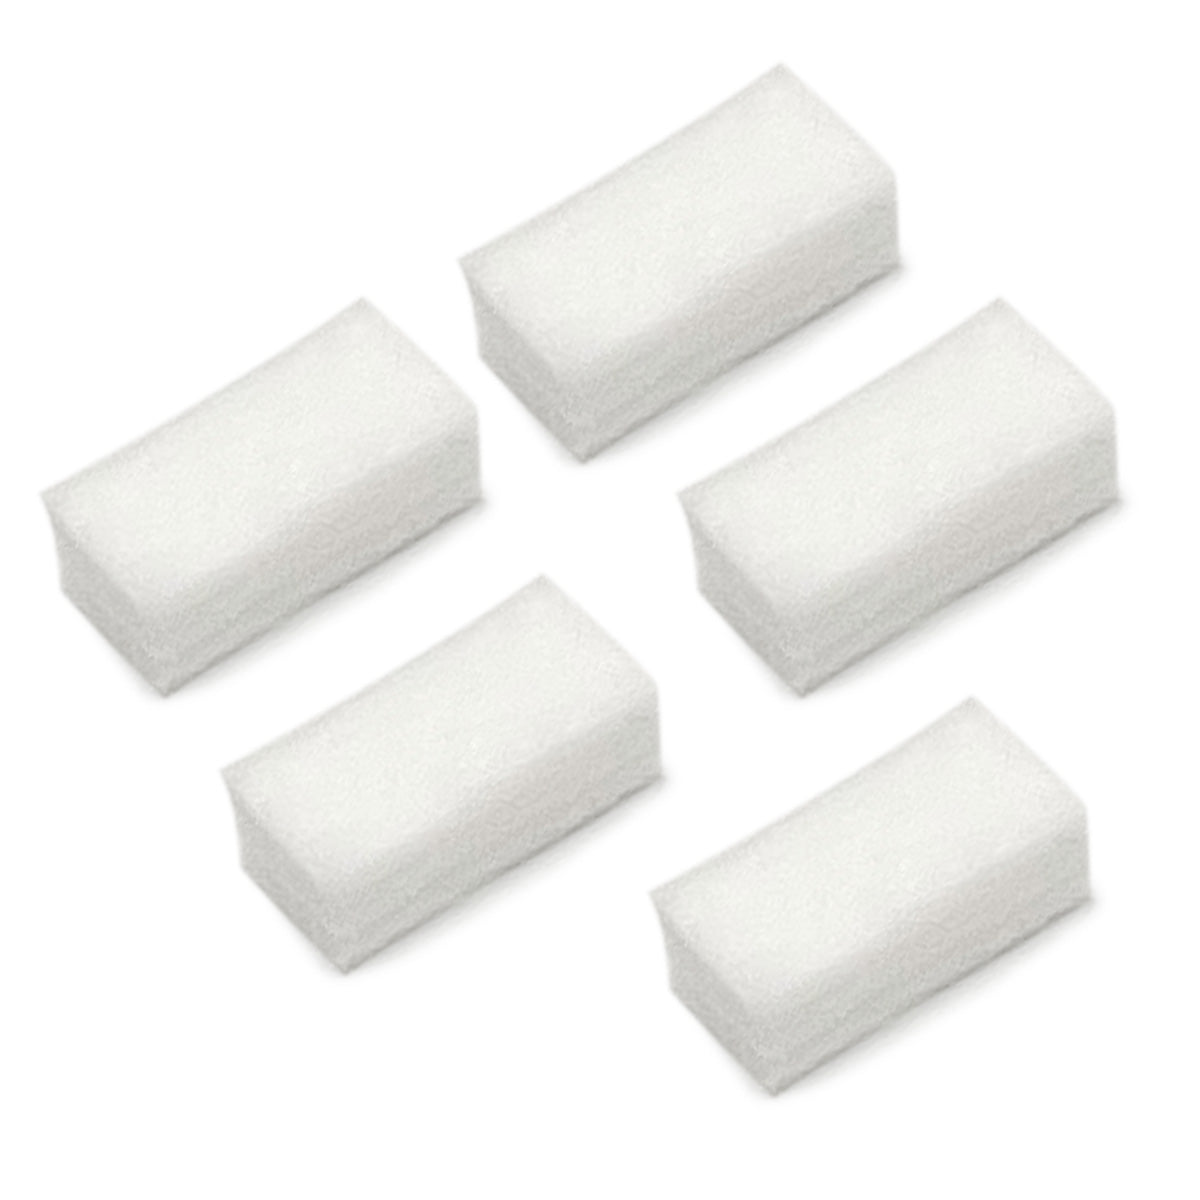 Cotton Intake Filters for Rhythm P2 Series Portable Oxygen Concentrators (5-Pack)